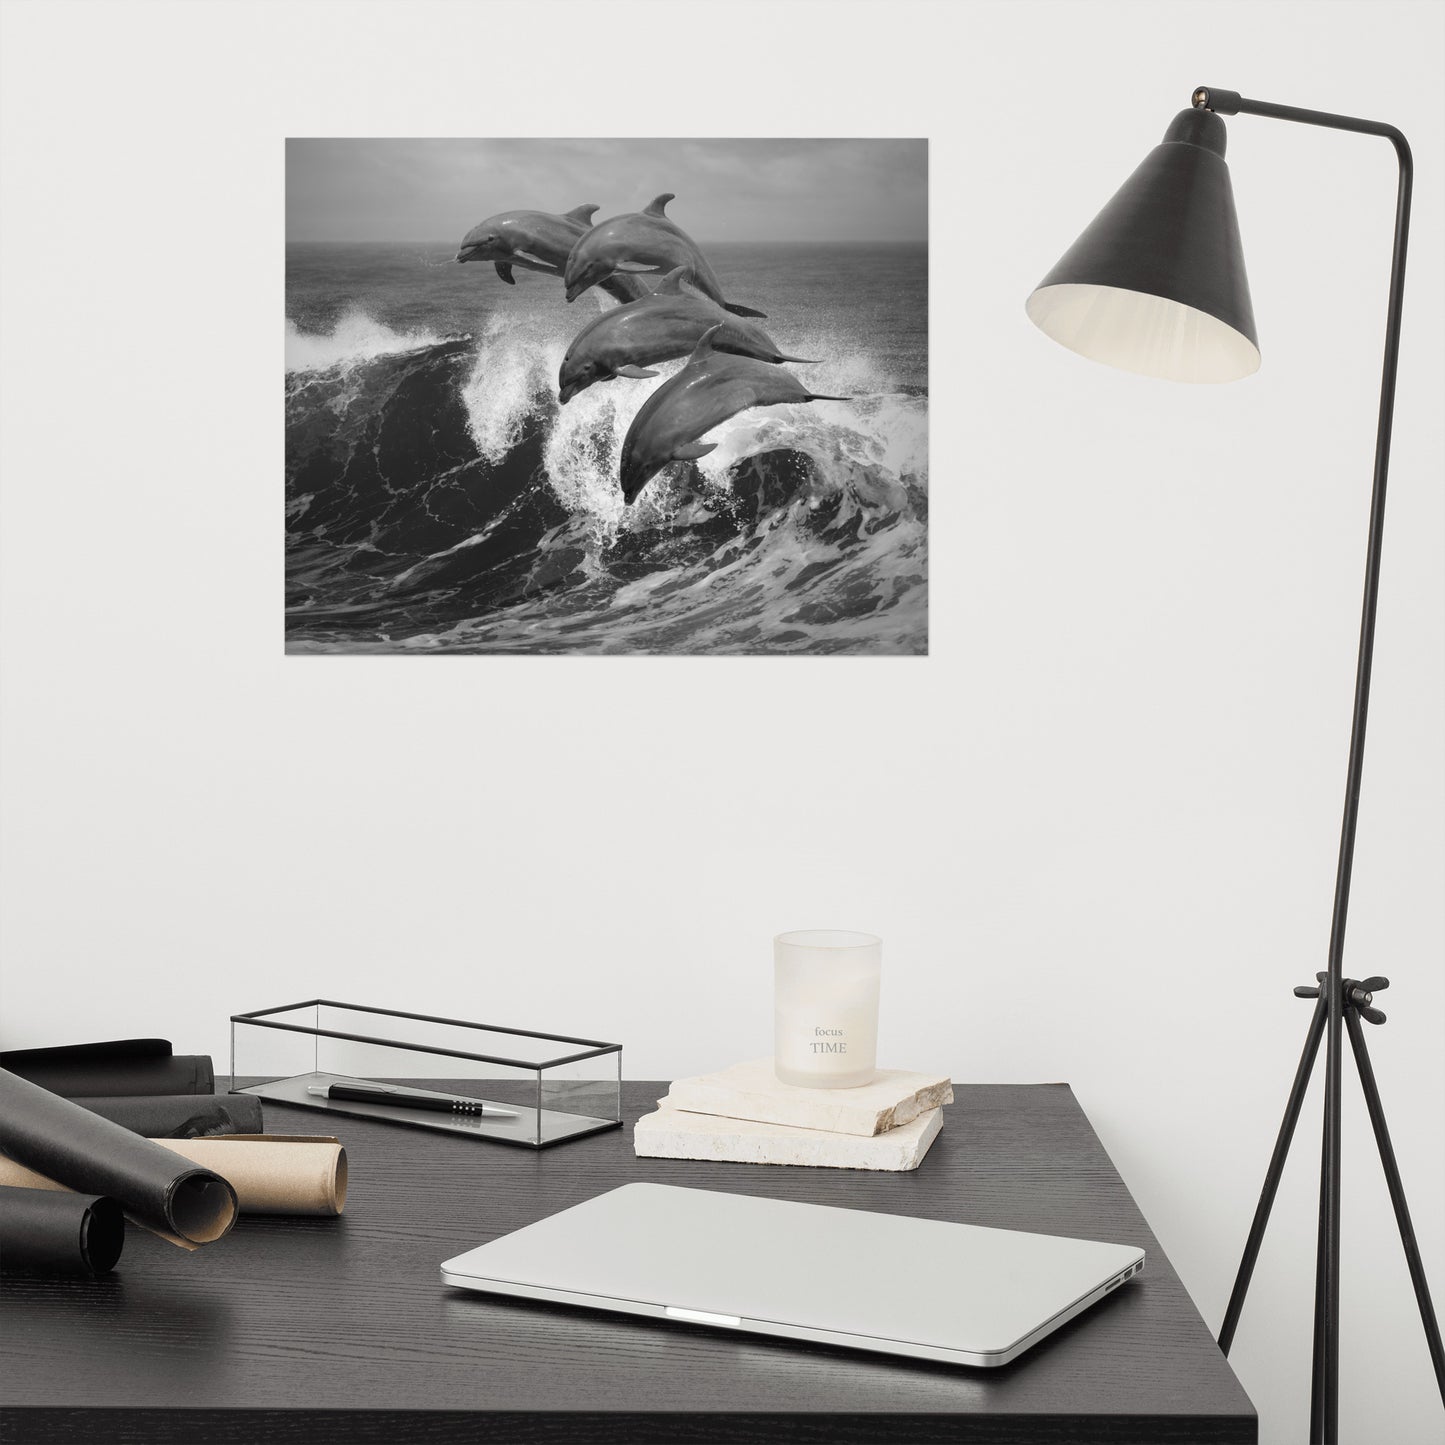 Four Bottle Noise Dolphins Jumping Waves In Tropical Ocean Black and White Animal Wildlife Photograph Loose Wall Art Print